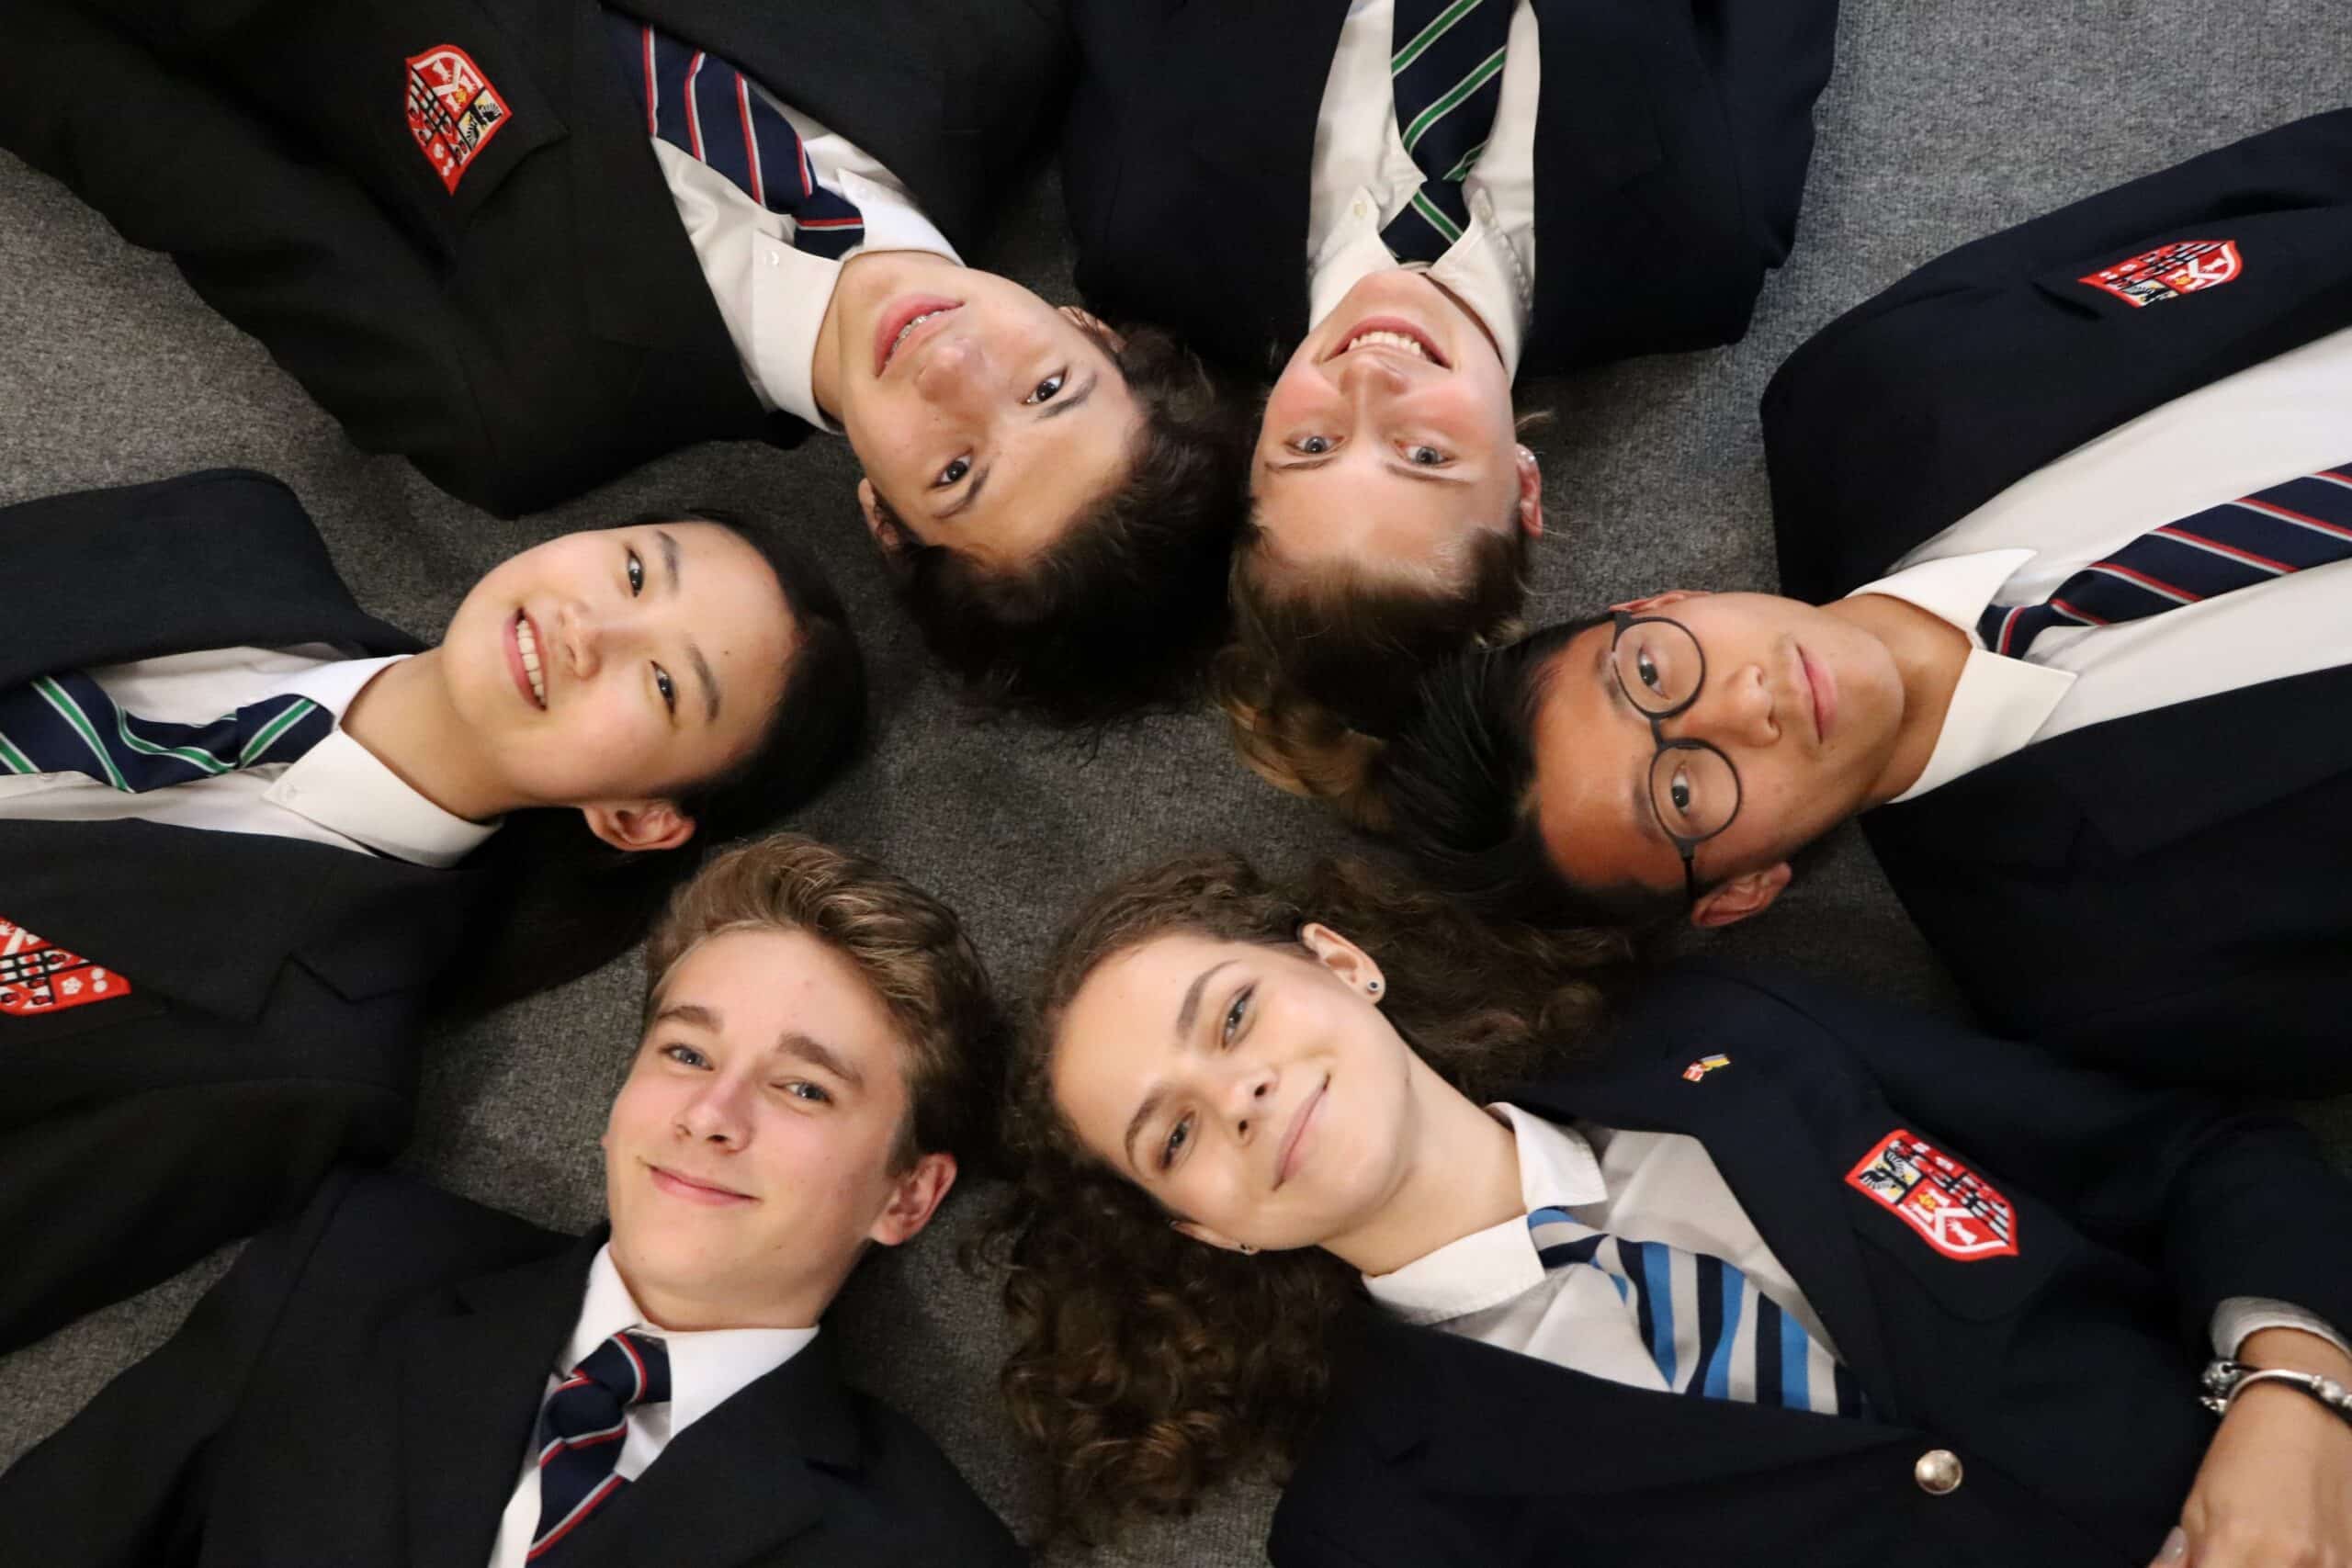 Brentwood School: First-class education and boarding